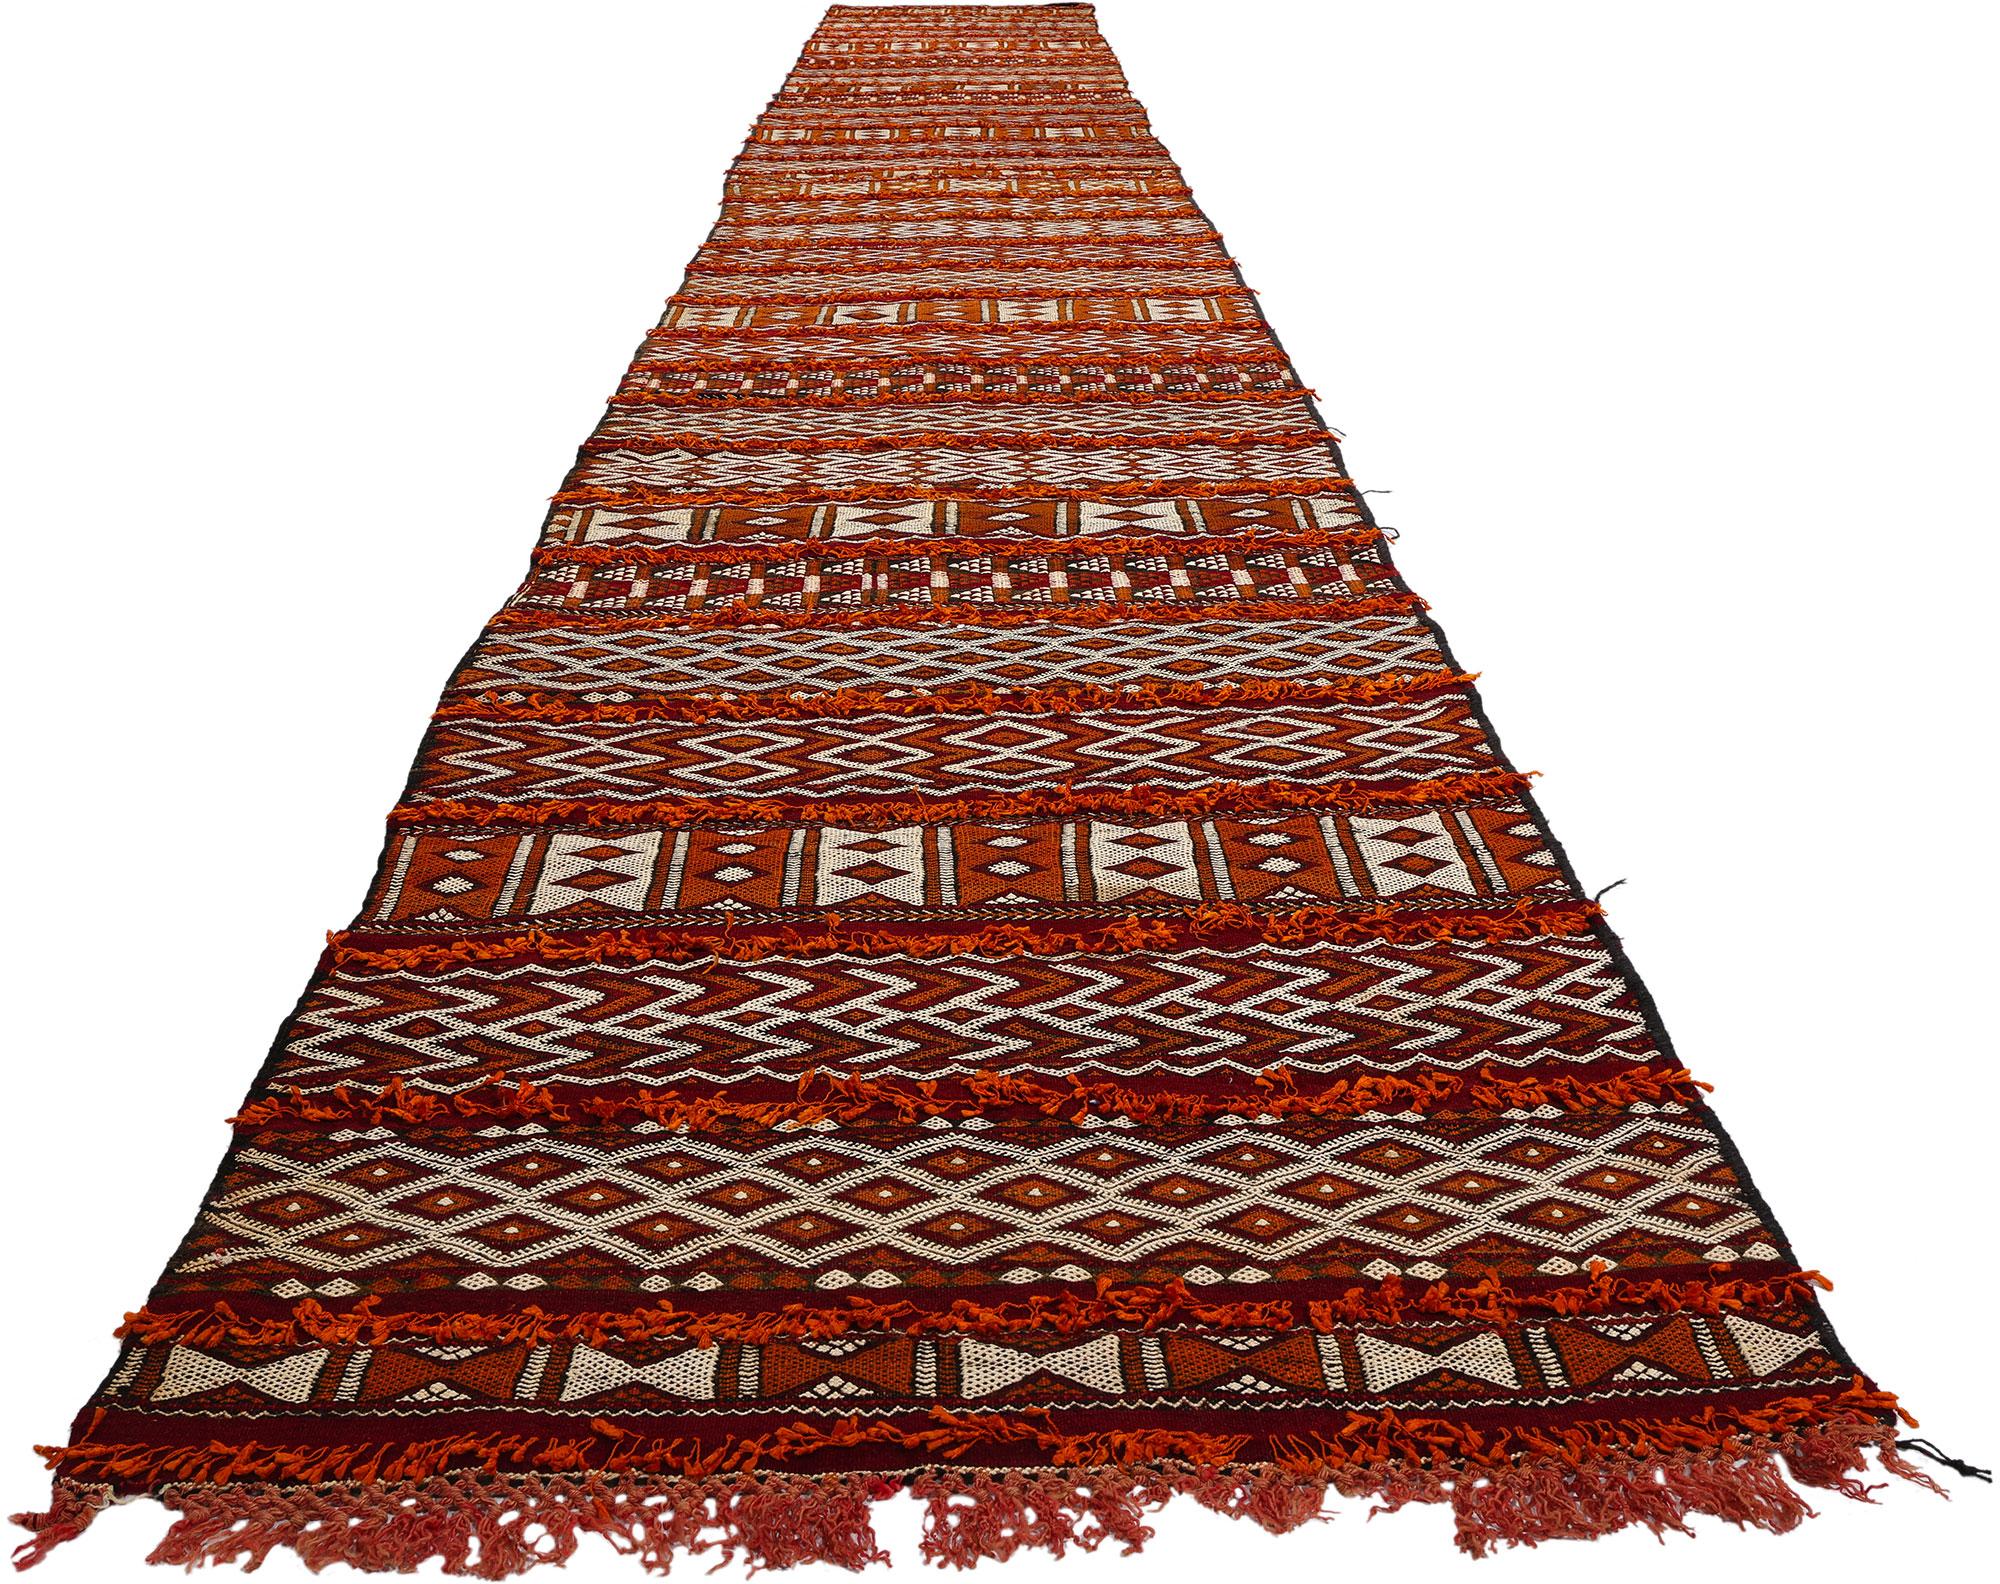 Midcentury Bohemian Vintage Moroccan Zemmour Kilim Berber Rug, 03'02 x 23'02 In Good Condition For Sale In Dallas, TX